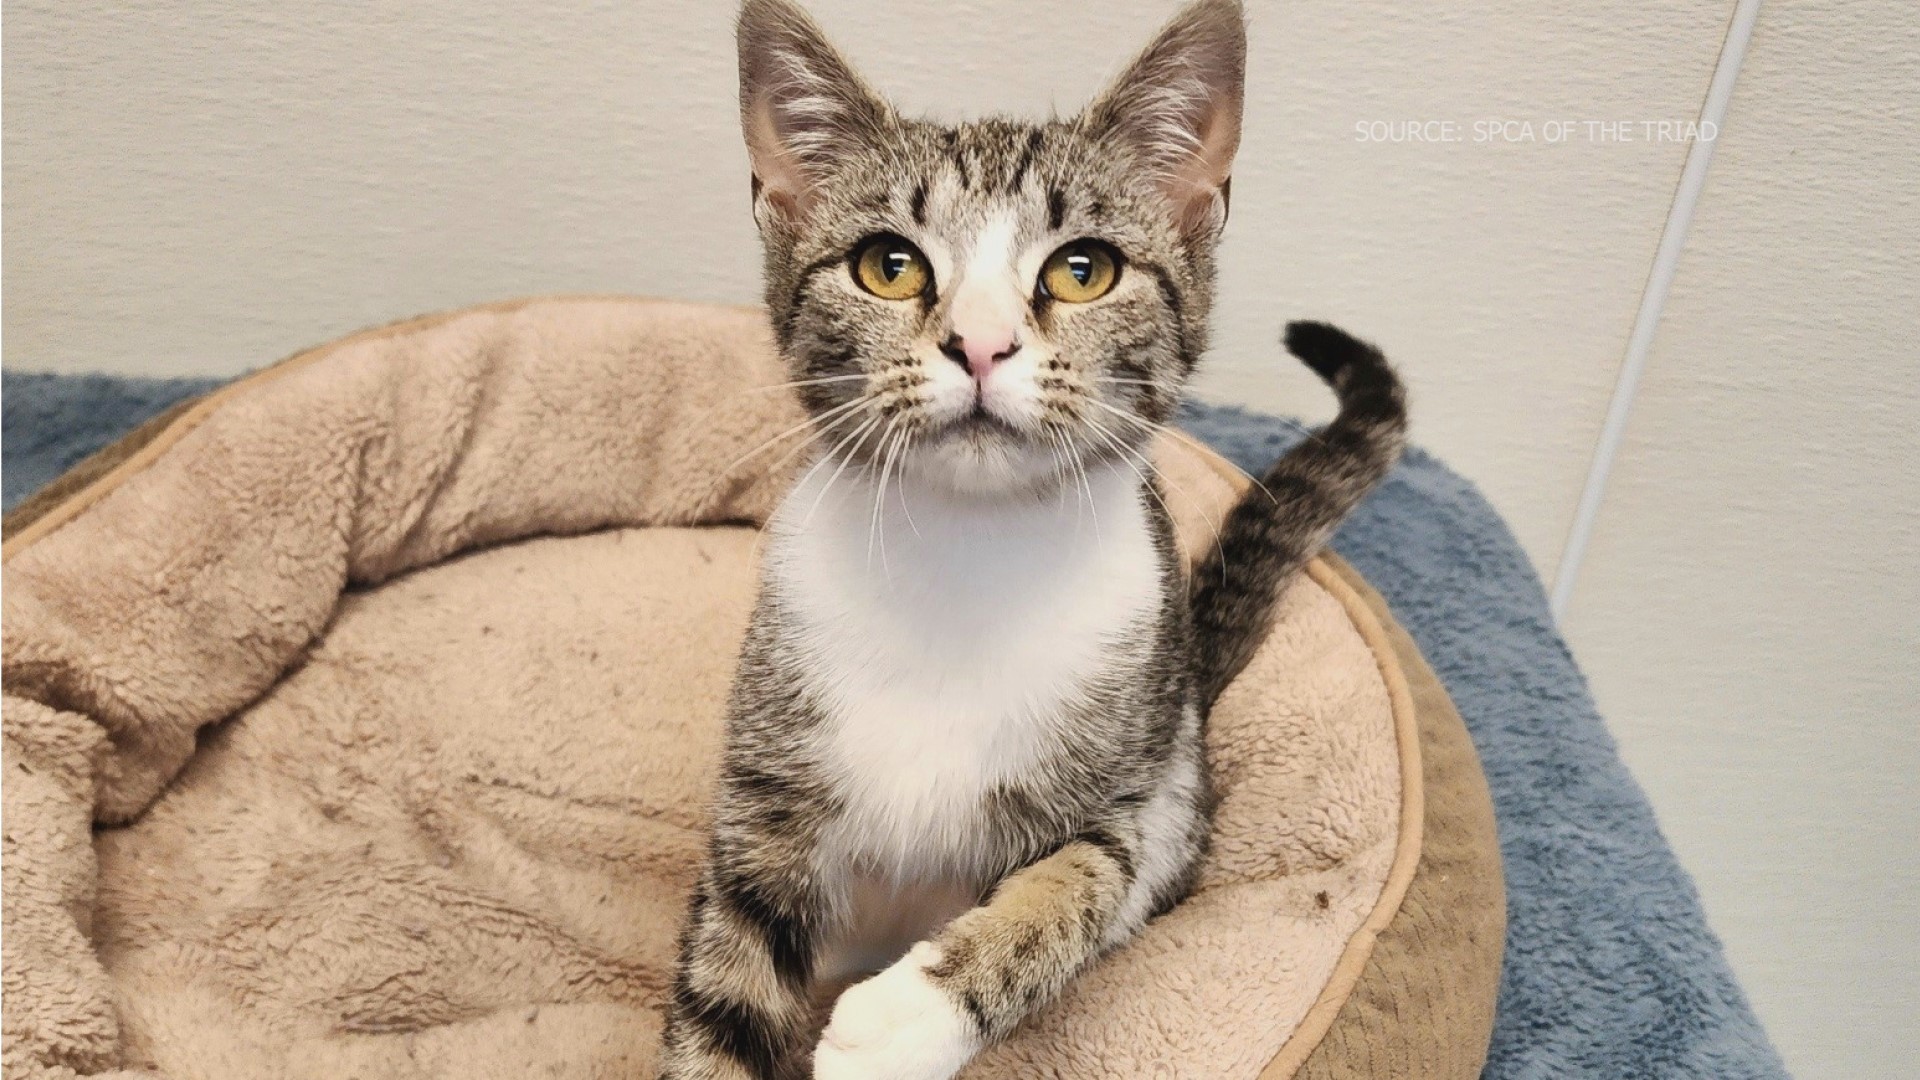 Let’s get Purrmione Granger adopted!